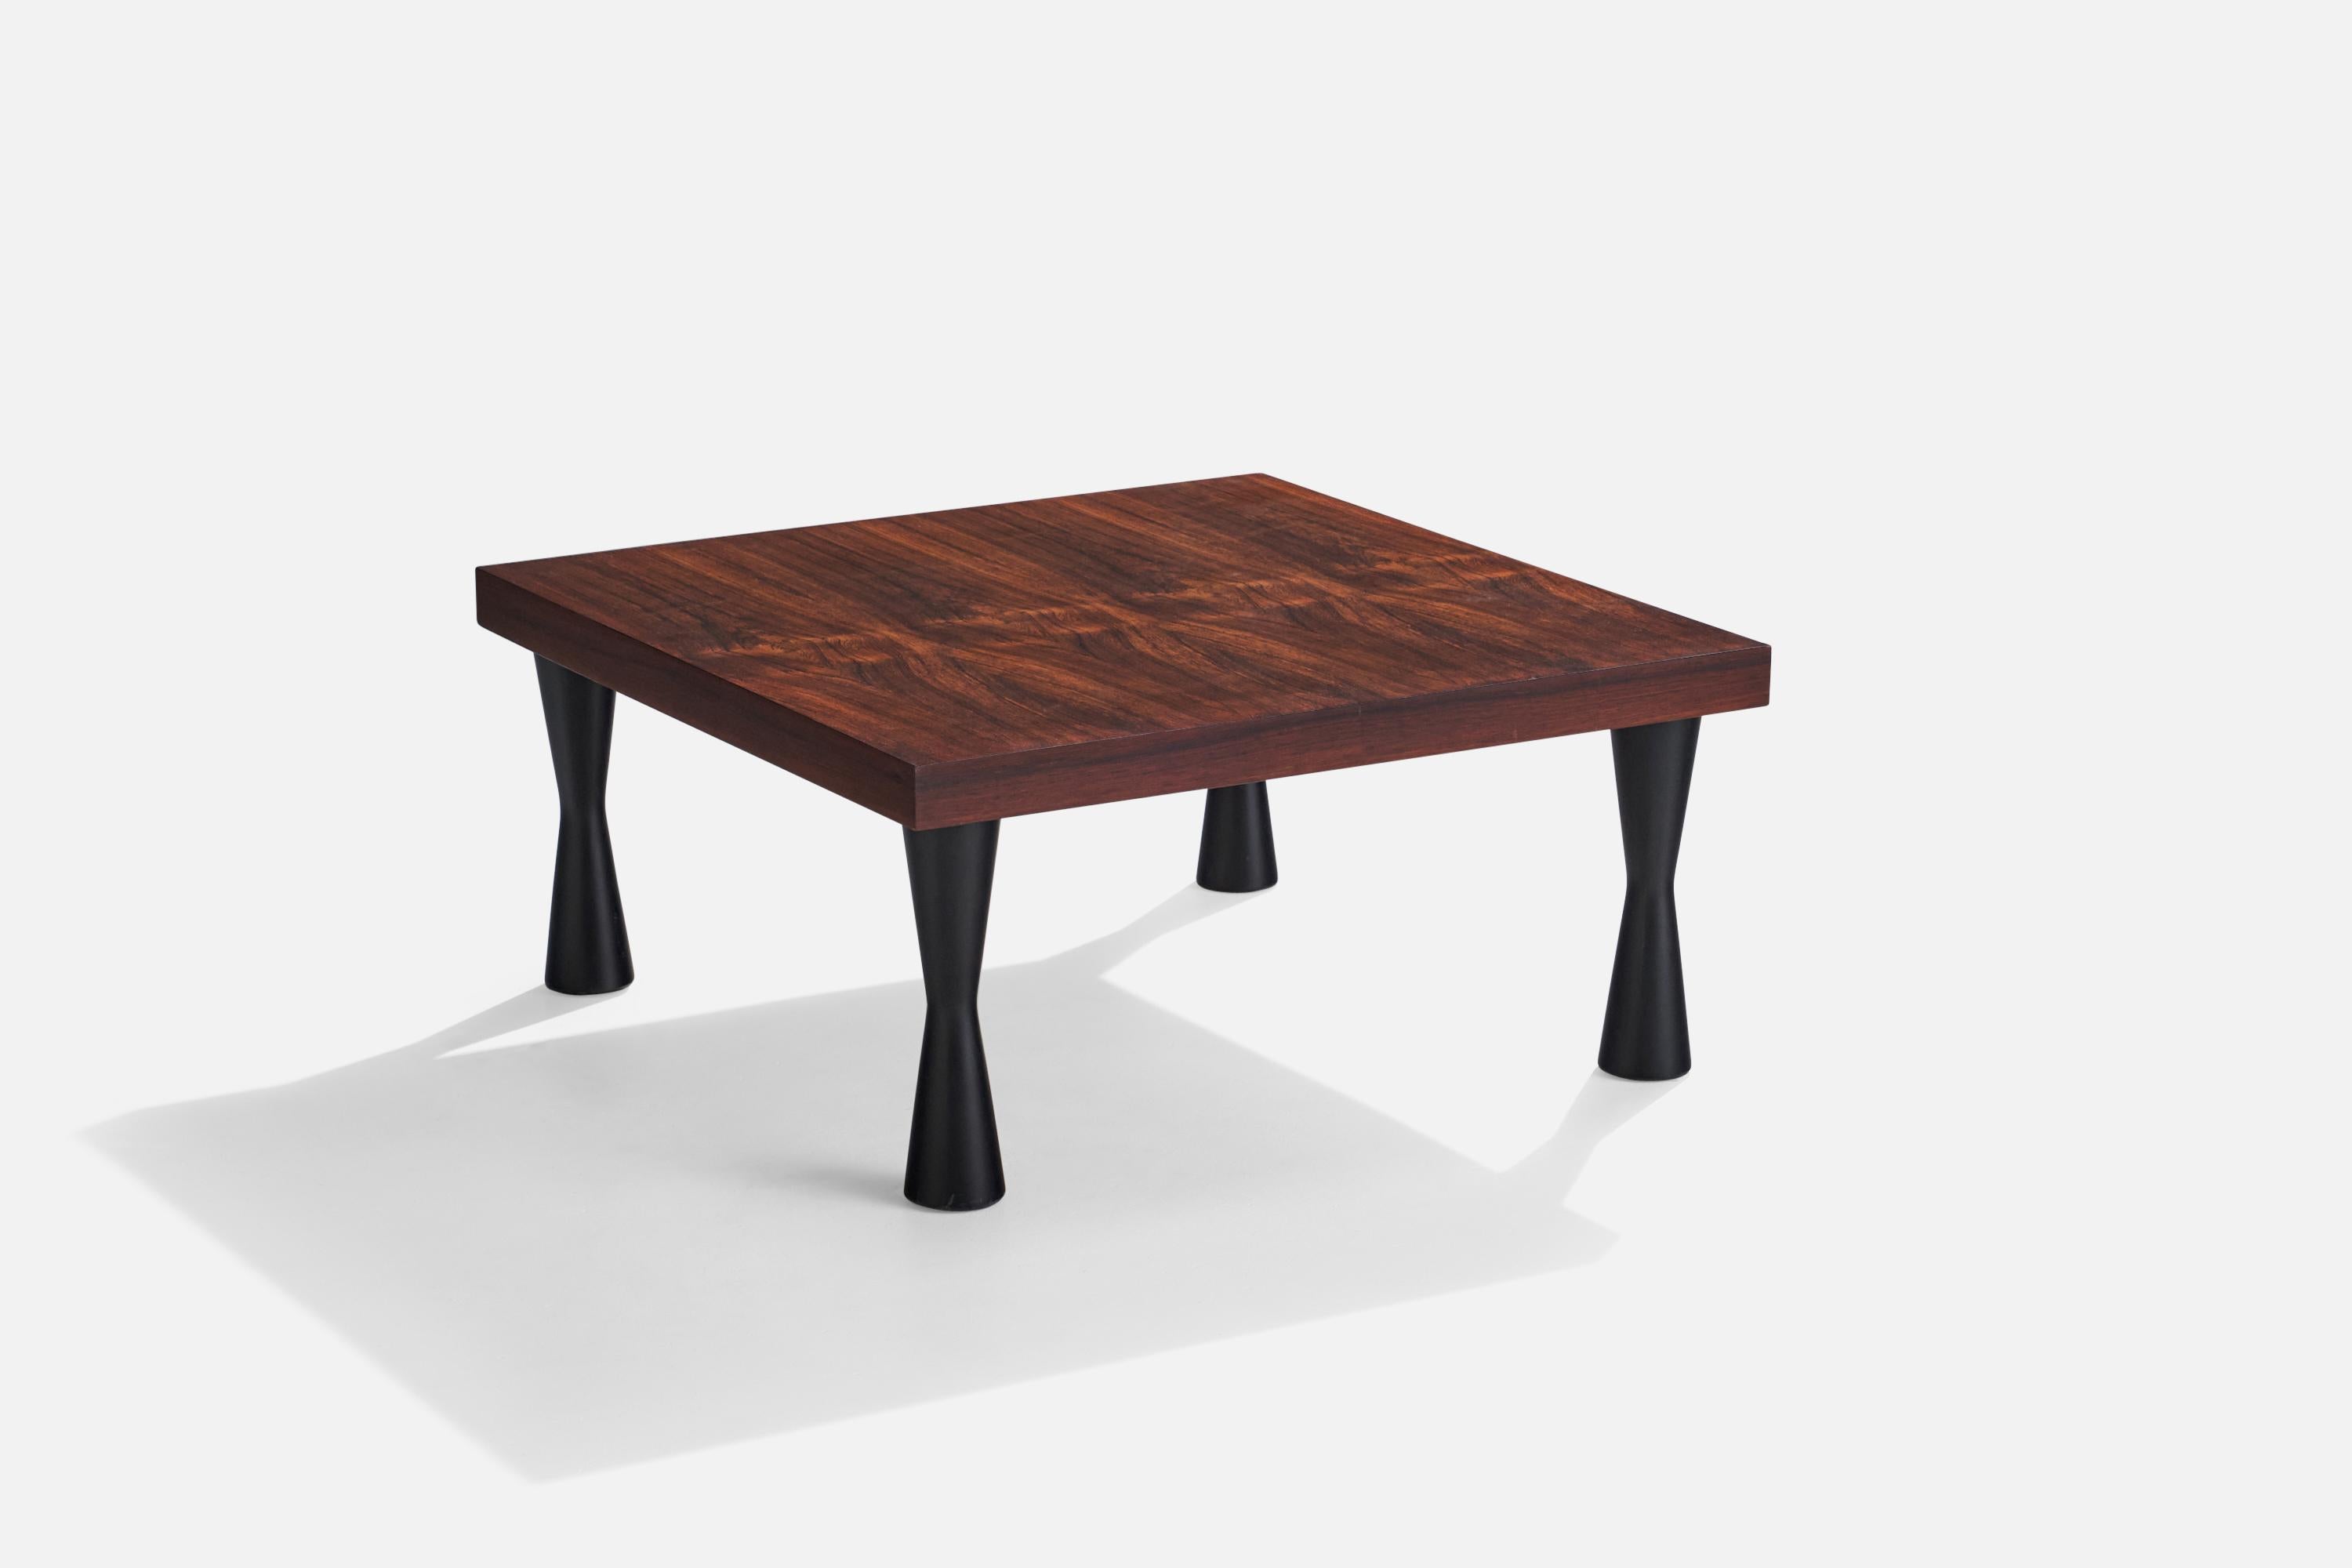 A rosewood coffee table designed and produced in Brazil, c. 1970s.